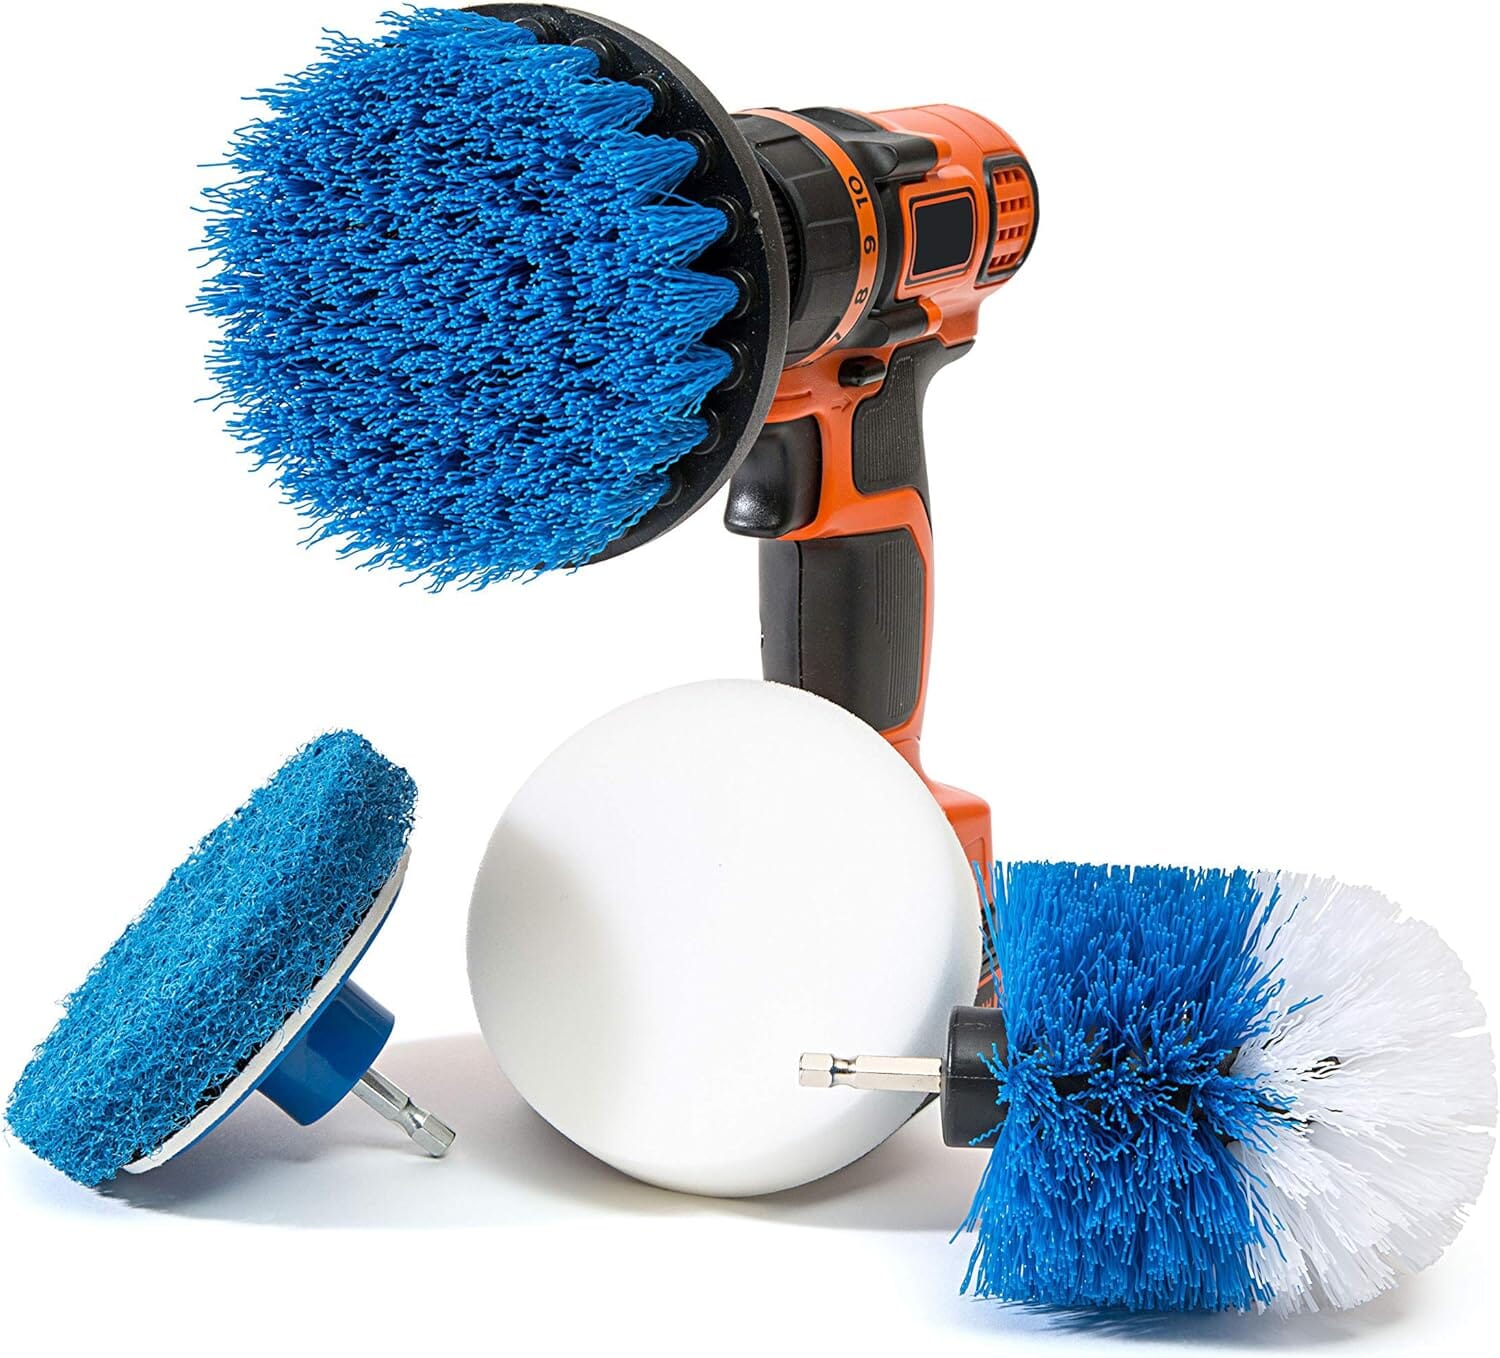 RevoClean 4 Piece Scrub Brush Power Drill Attachments-All Purpose Time Saving Kit-Perfect for Cleaning Grout, Tile, Counter, Shower, Grill, Floor, Kitchen, Blue & White Plunger TubShroom.com 